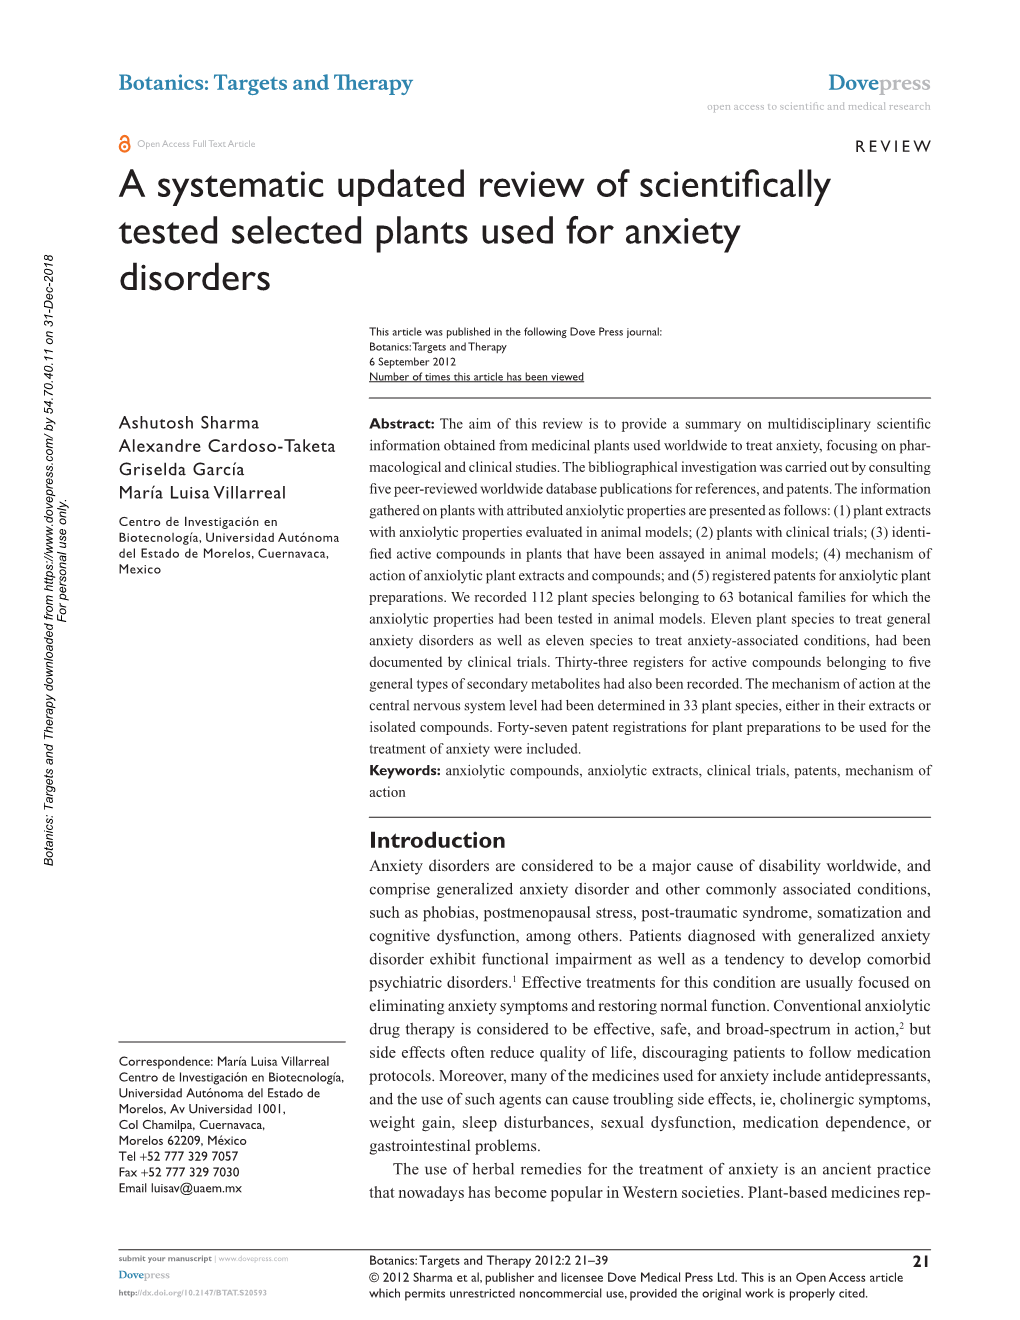 A Systematic Updated Review of Scientifically Tested Selected Plants Used for Anxiety Disorders